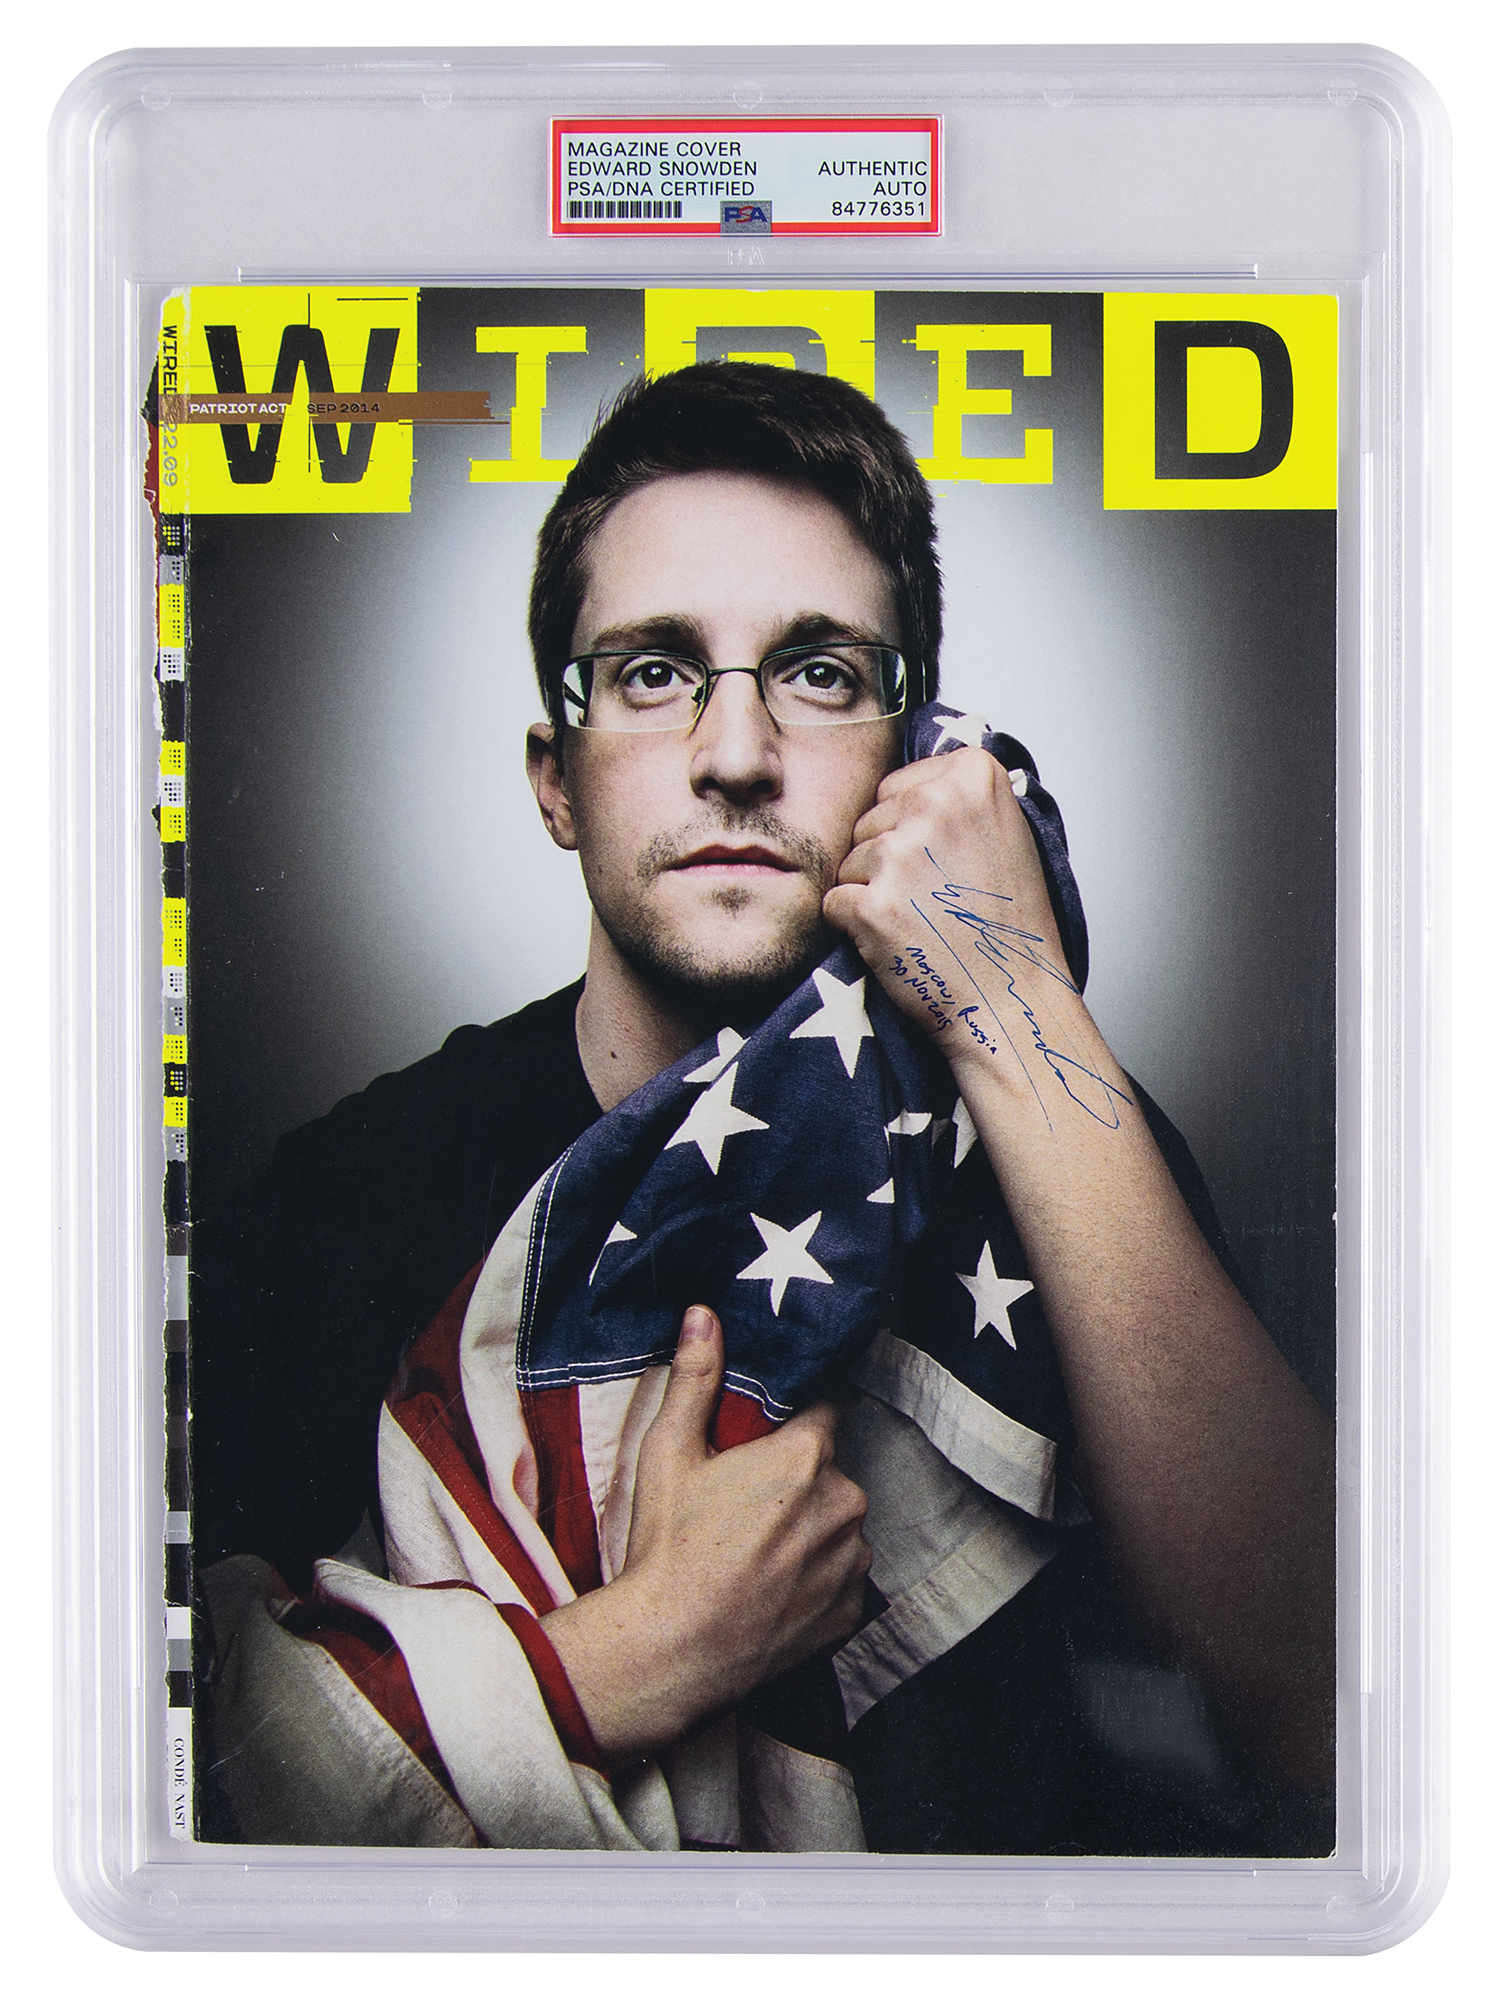 Lot #7071 Edward Snowden Signed Magazine Cover